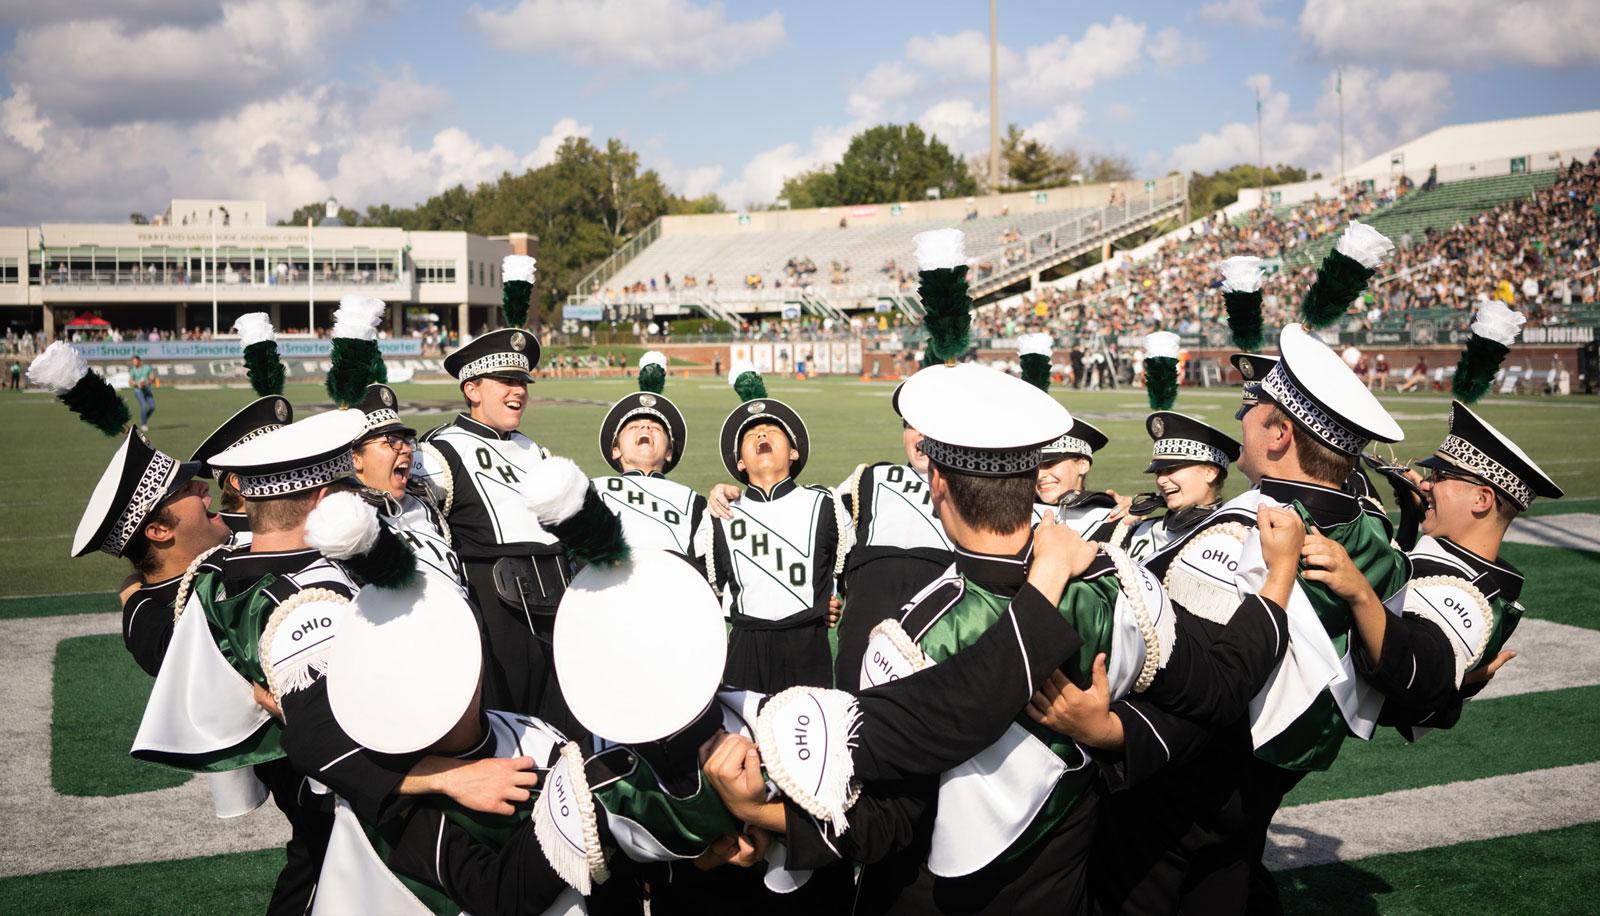 Members of The Marching 110 gather on the field before the homecoming game